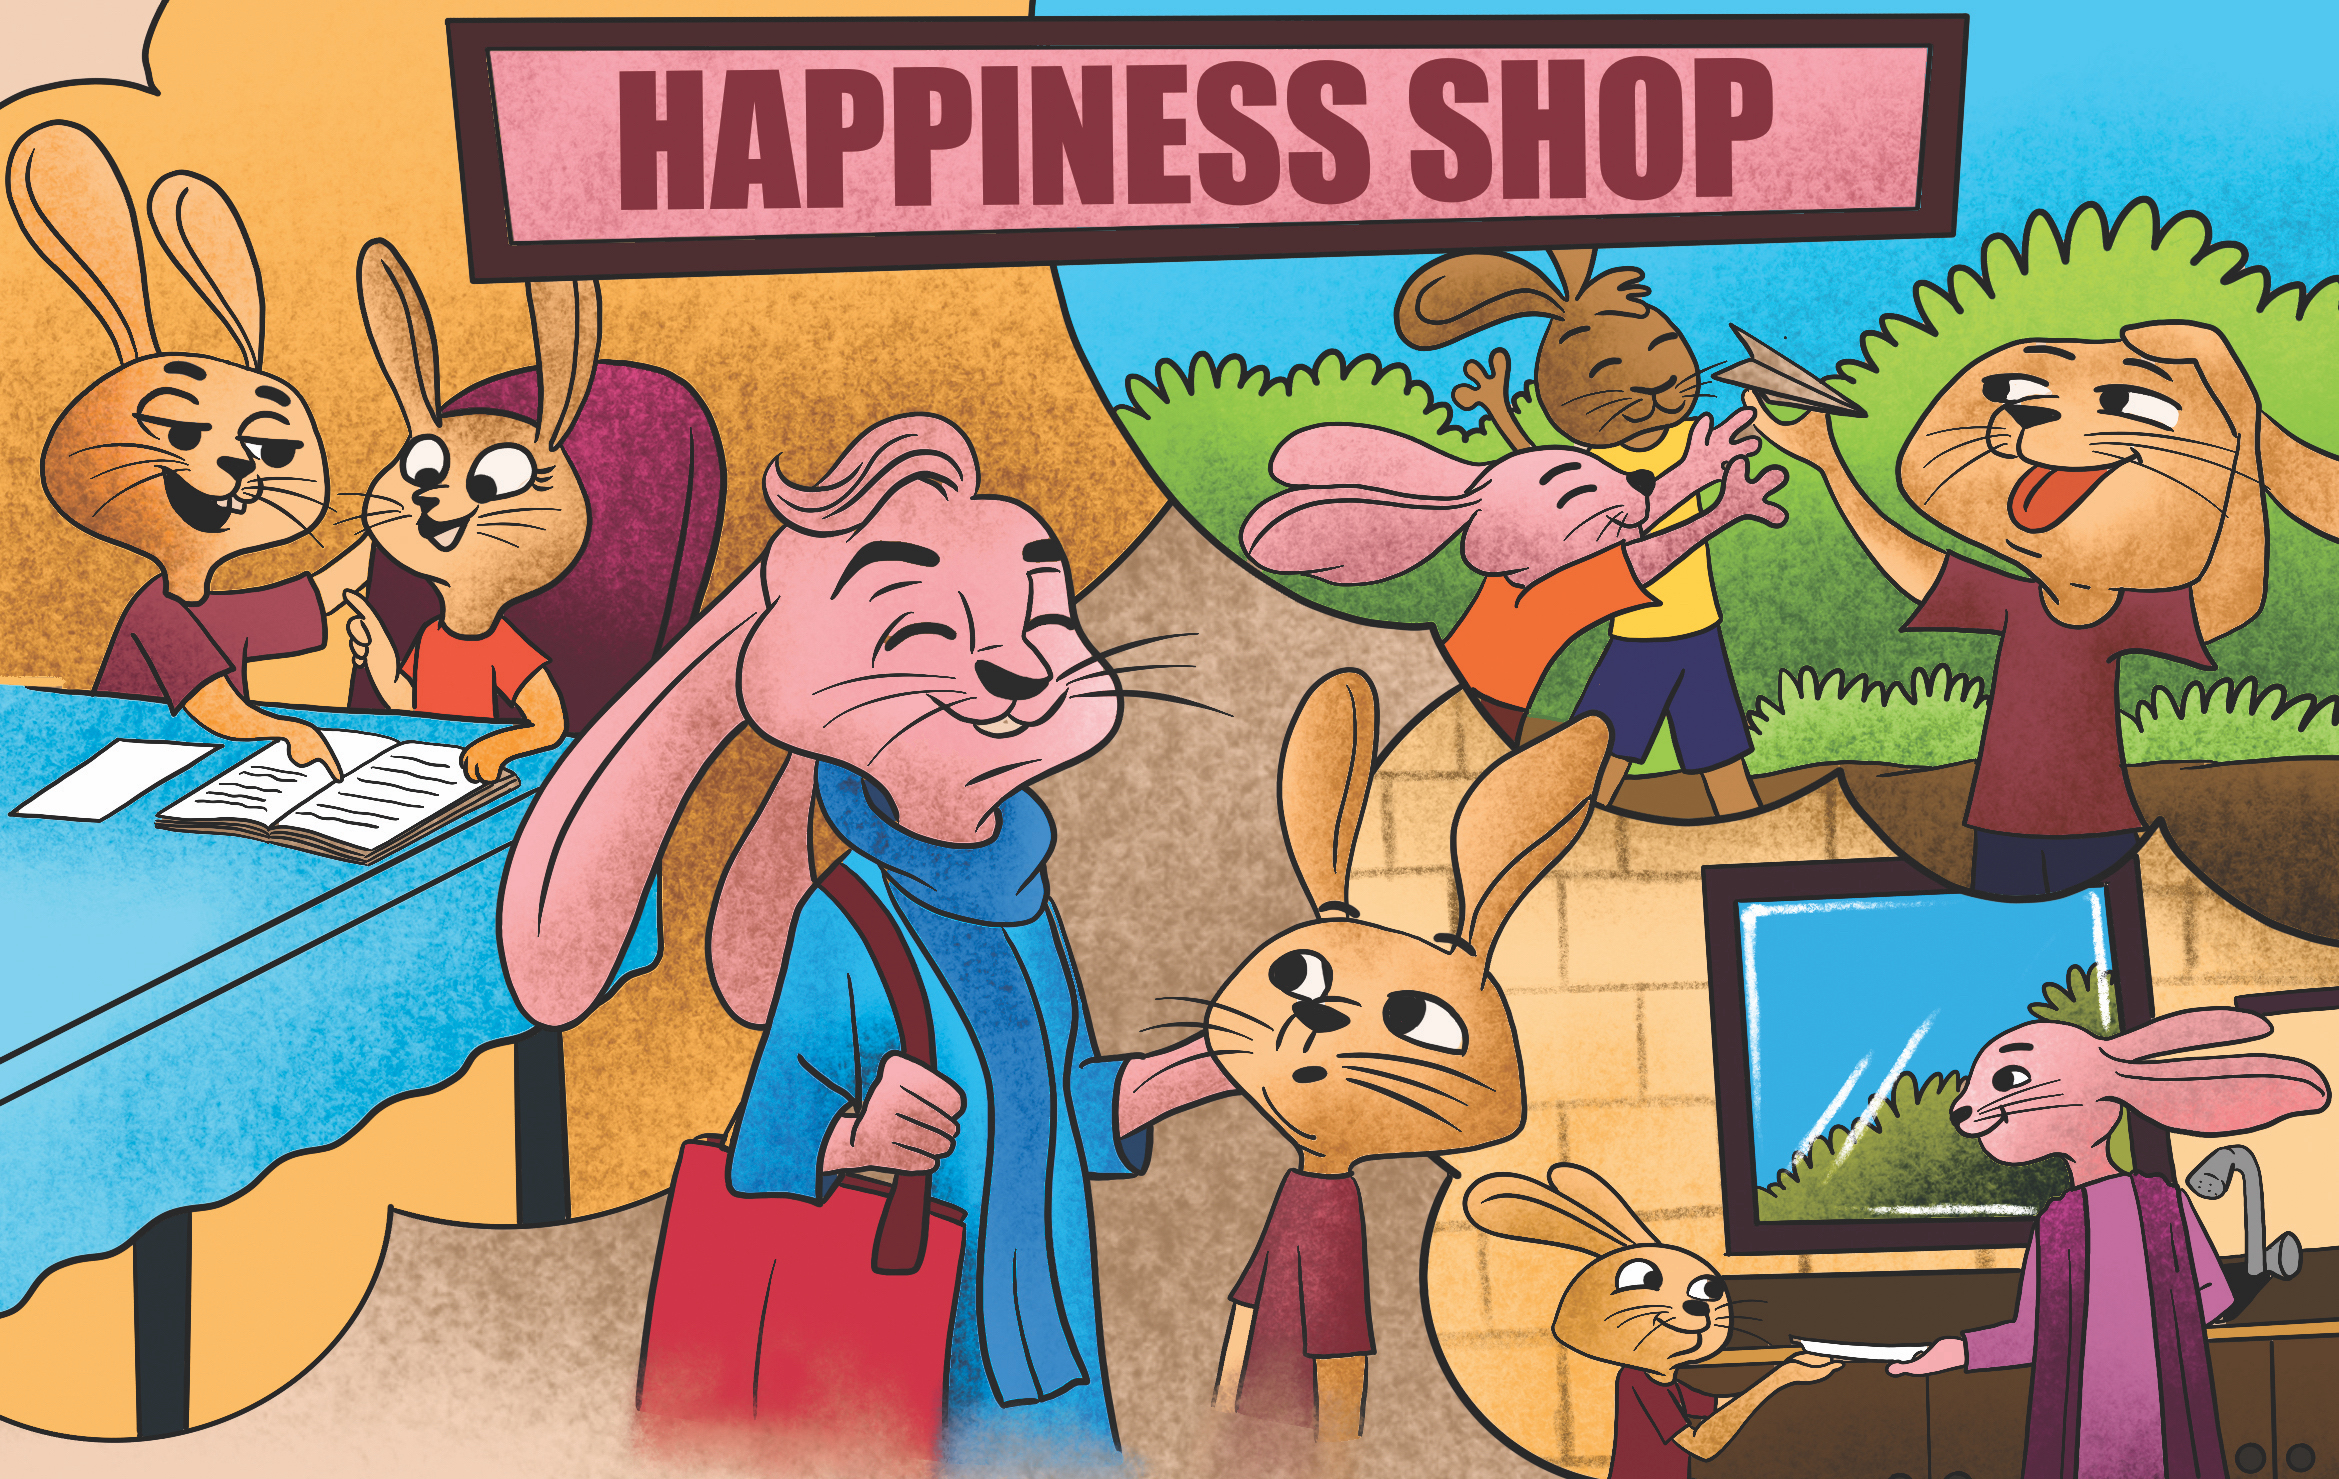 The Happiness Shop